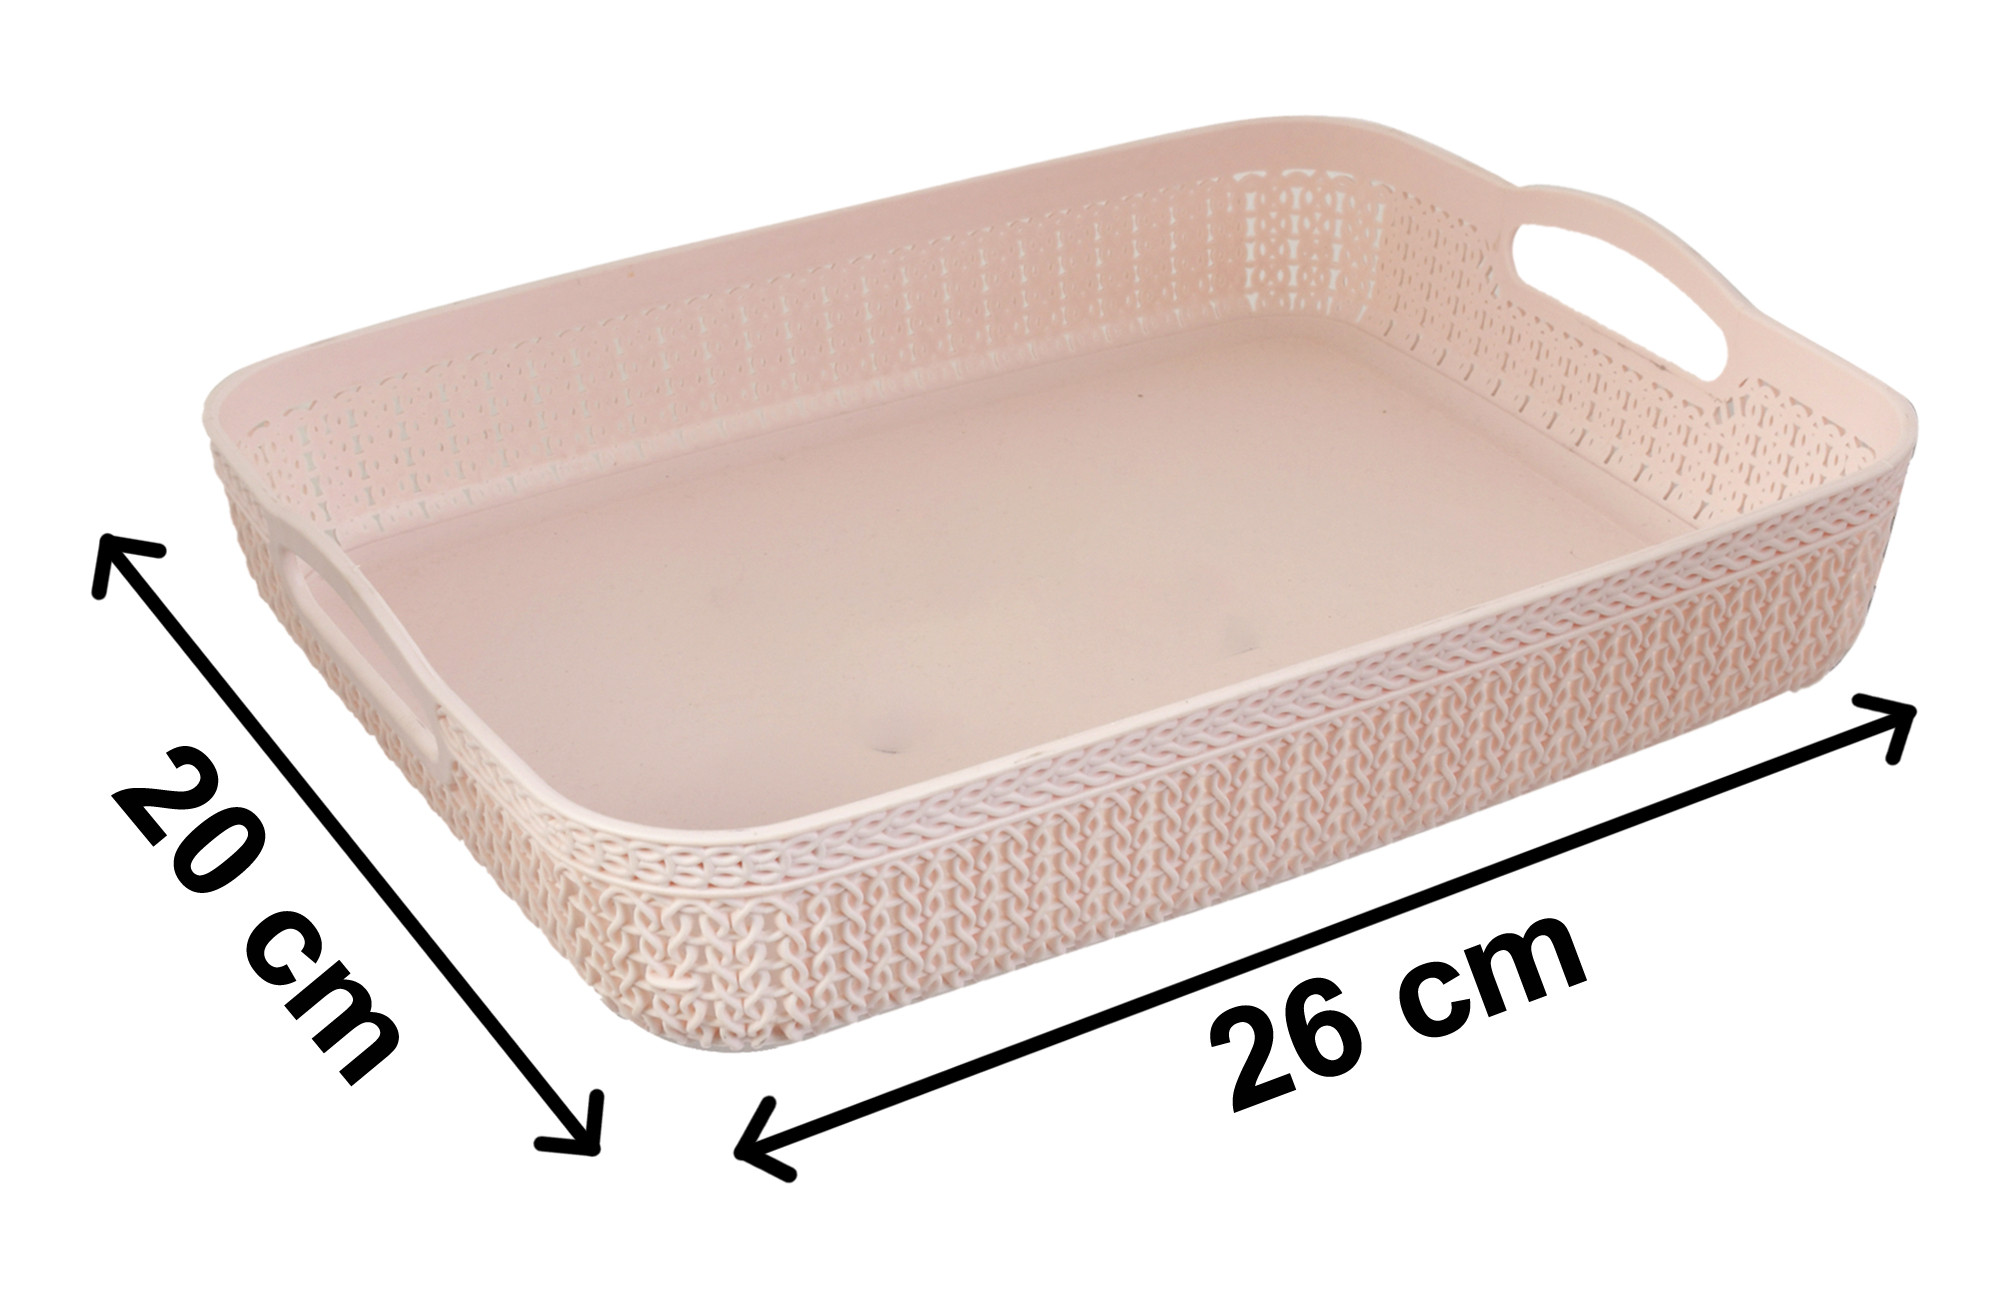 Kuber Industries Q-3,4 Unbreakable 2 Pieces Plastic Multipurpose Small & Large Size Flexible Storage Baskets/Fruit Vegetable Bathroom Stationary Home Basket with Handles,Multi